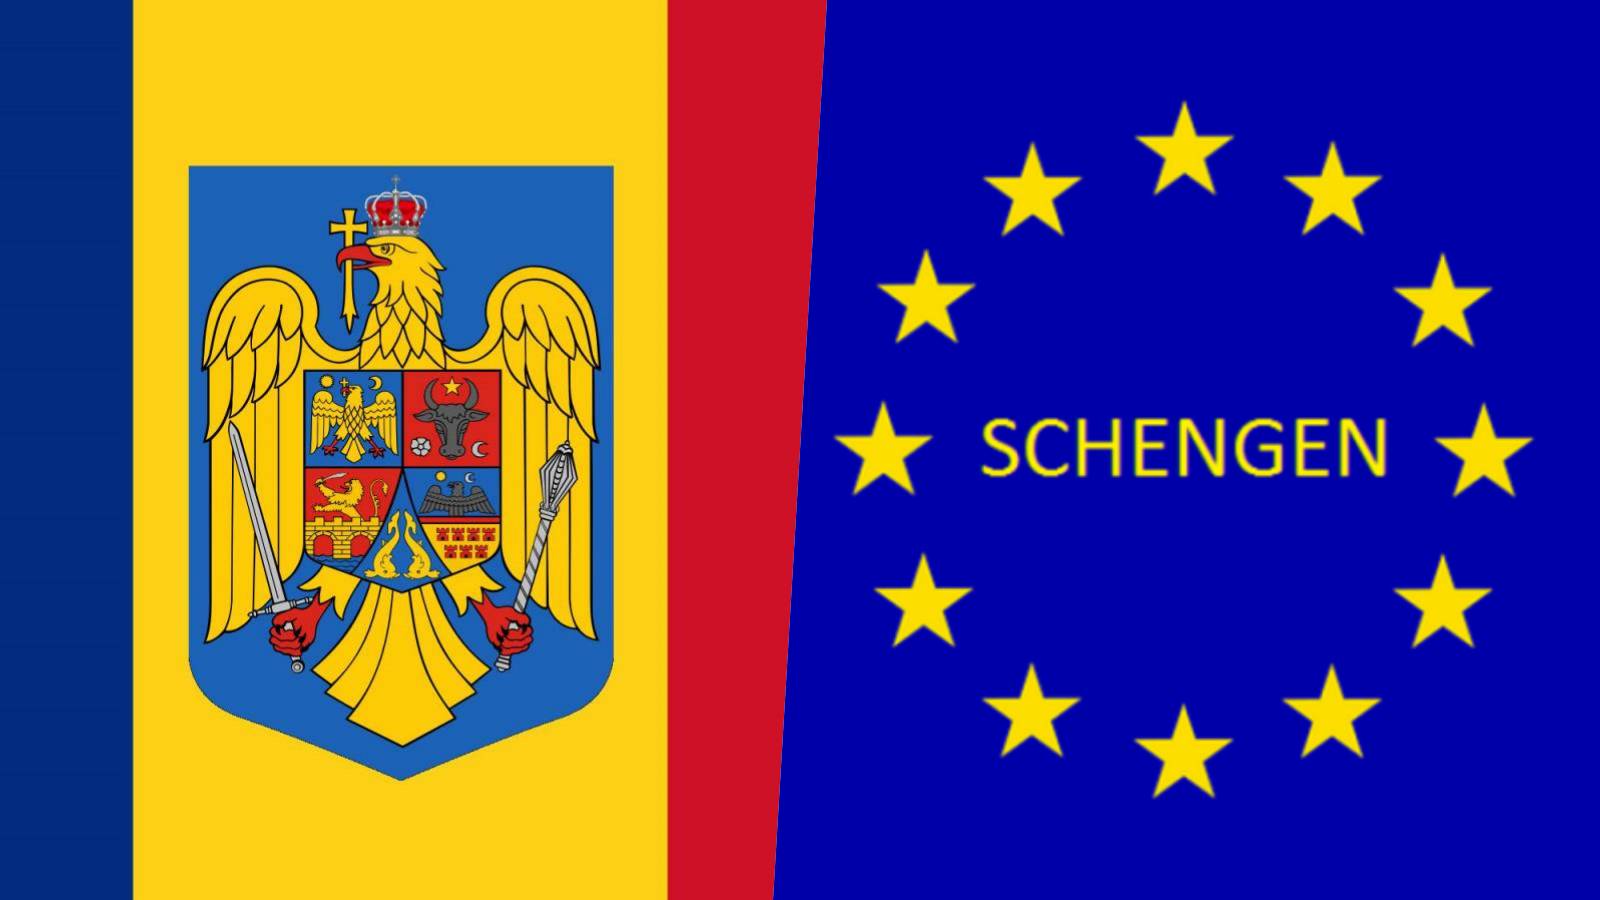 Romania Firm Official LAST MINUTE Measures Announced Completion of Schengen Accession